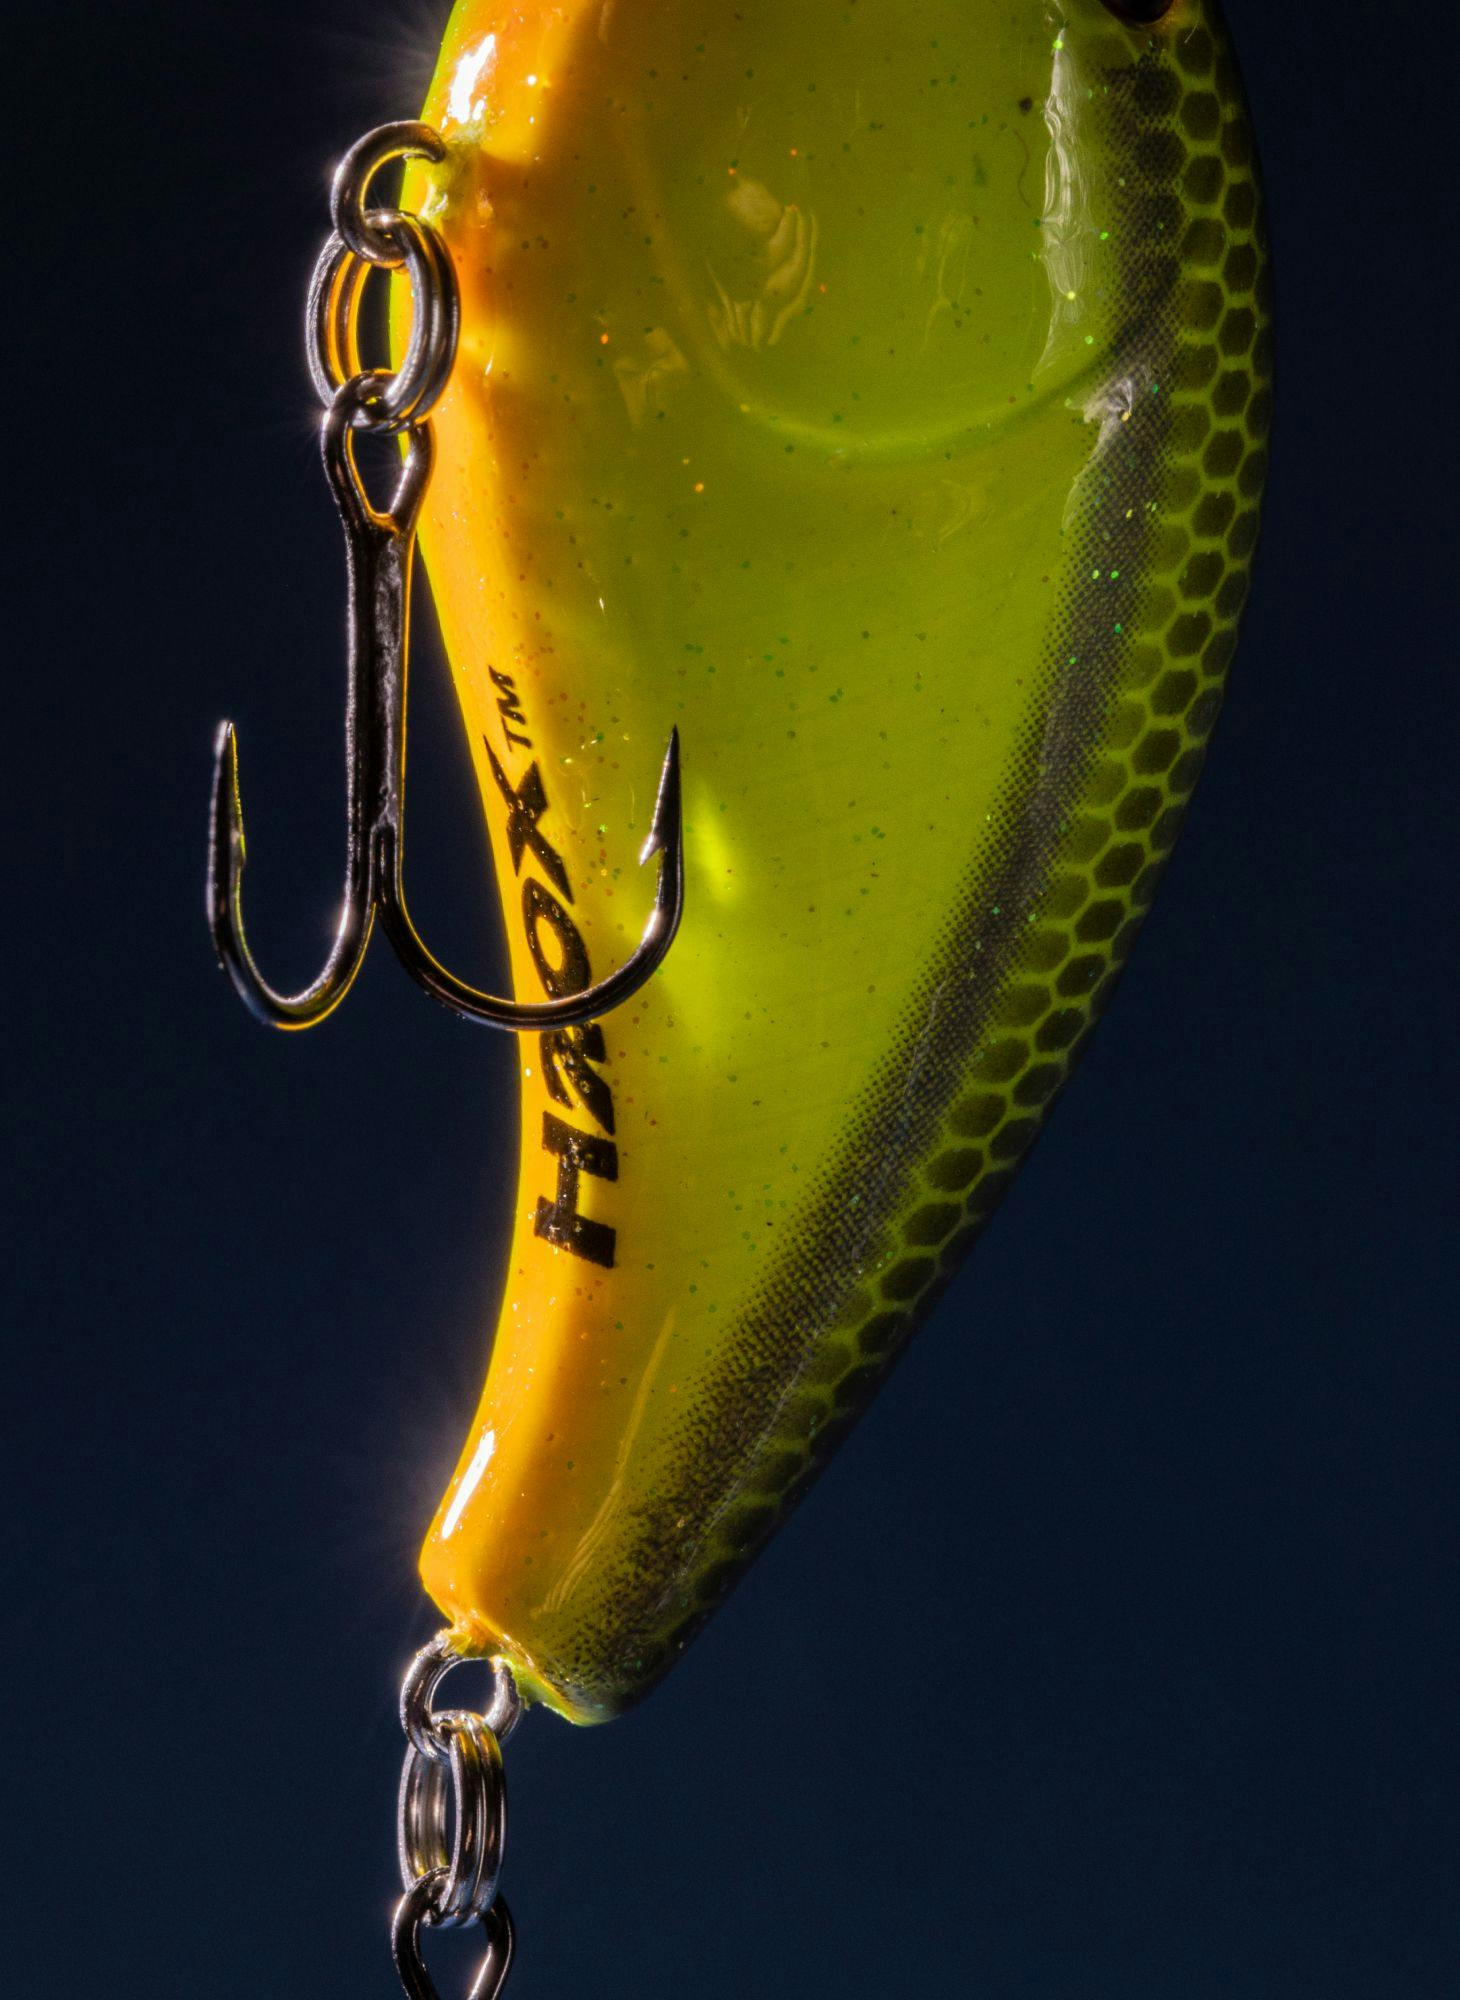 A bright yellow fishing lure and hook